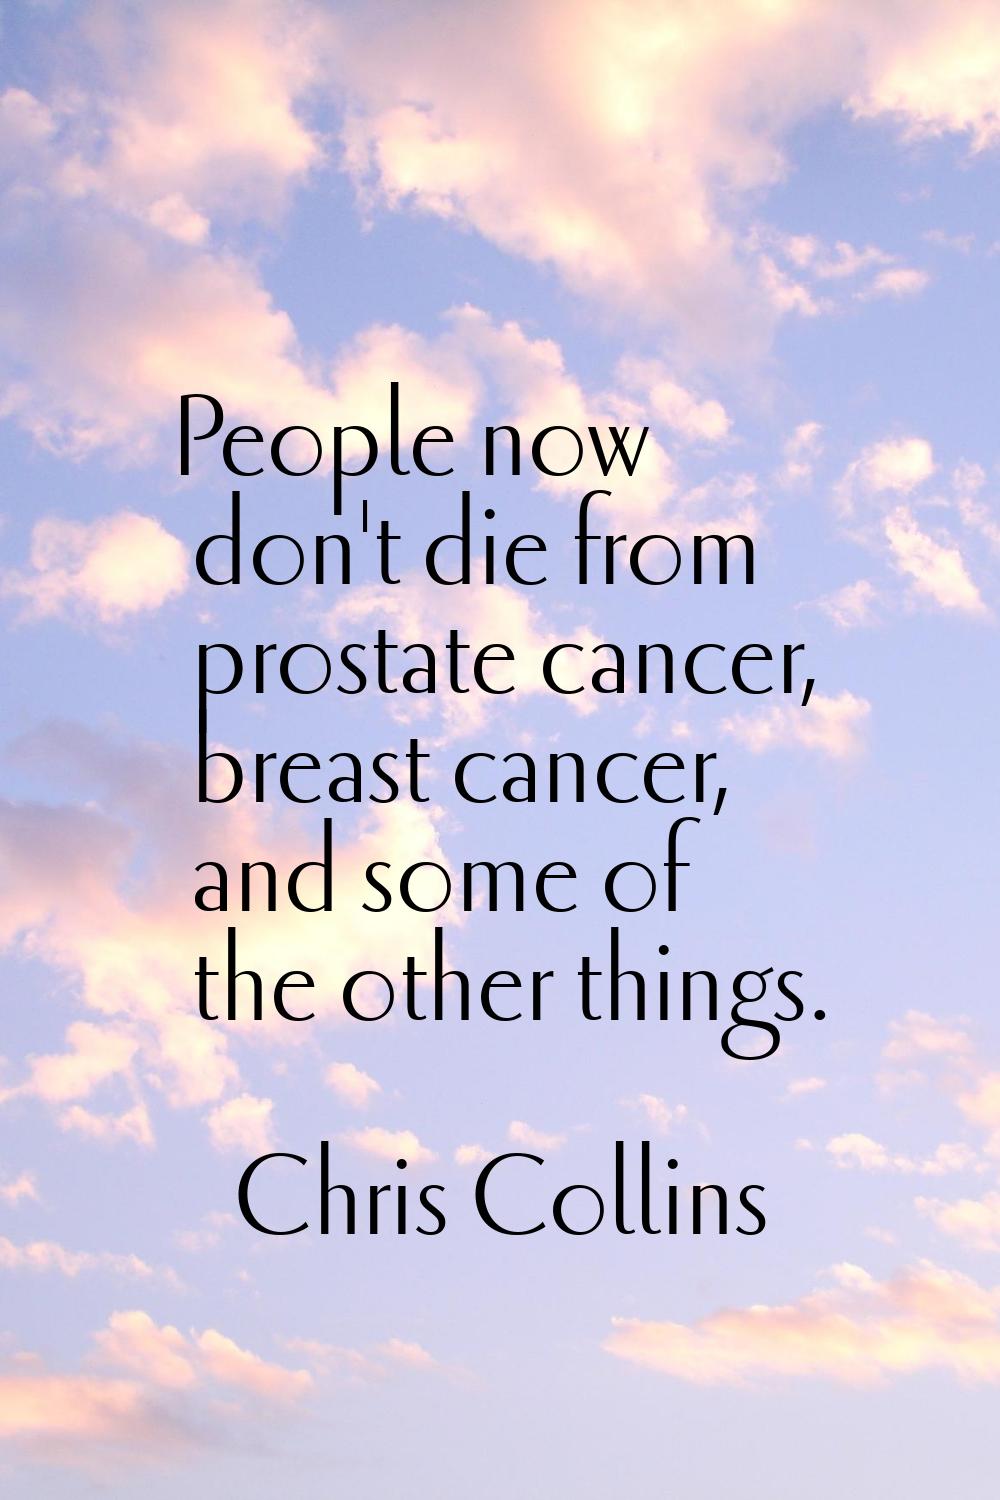 People now don't die from prostate cancer, breast cancer, and some of the other things.